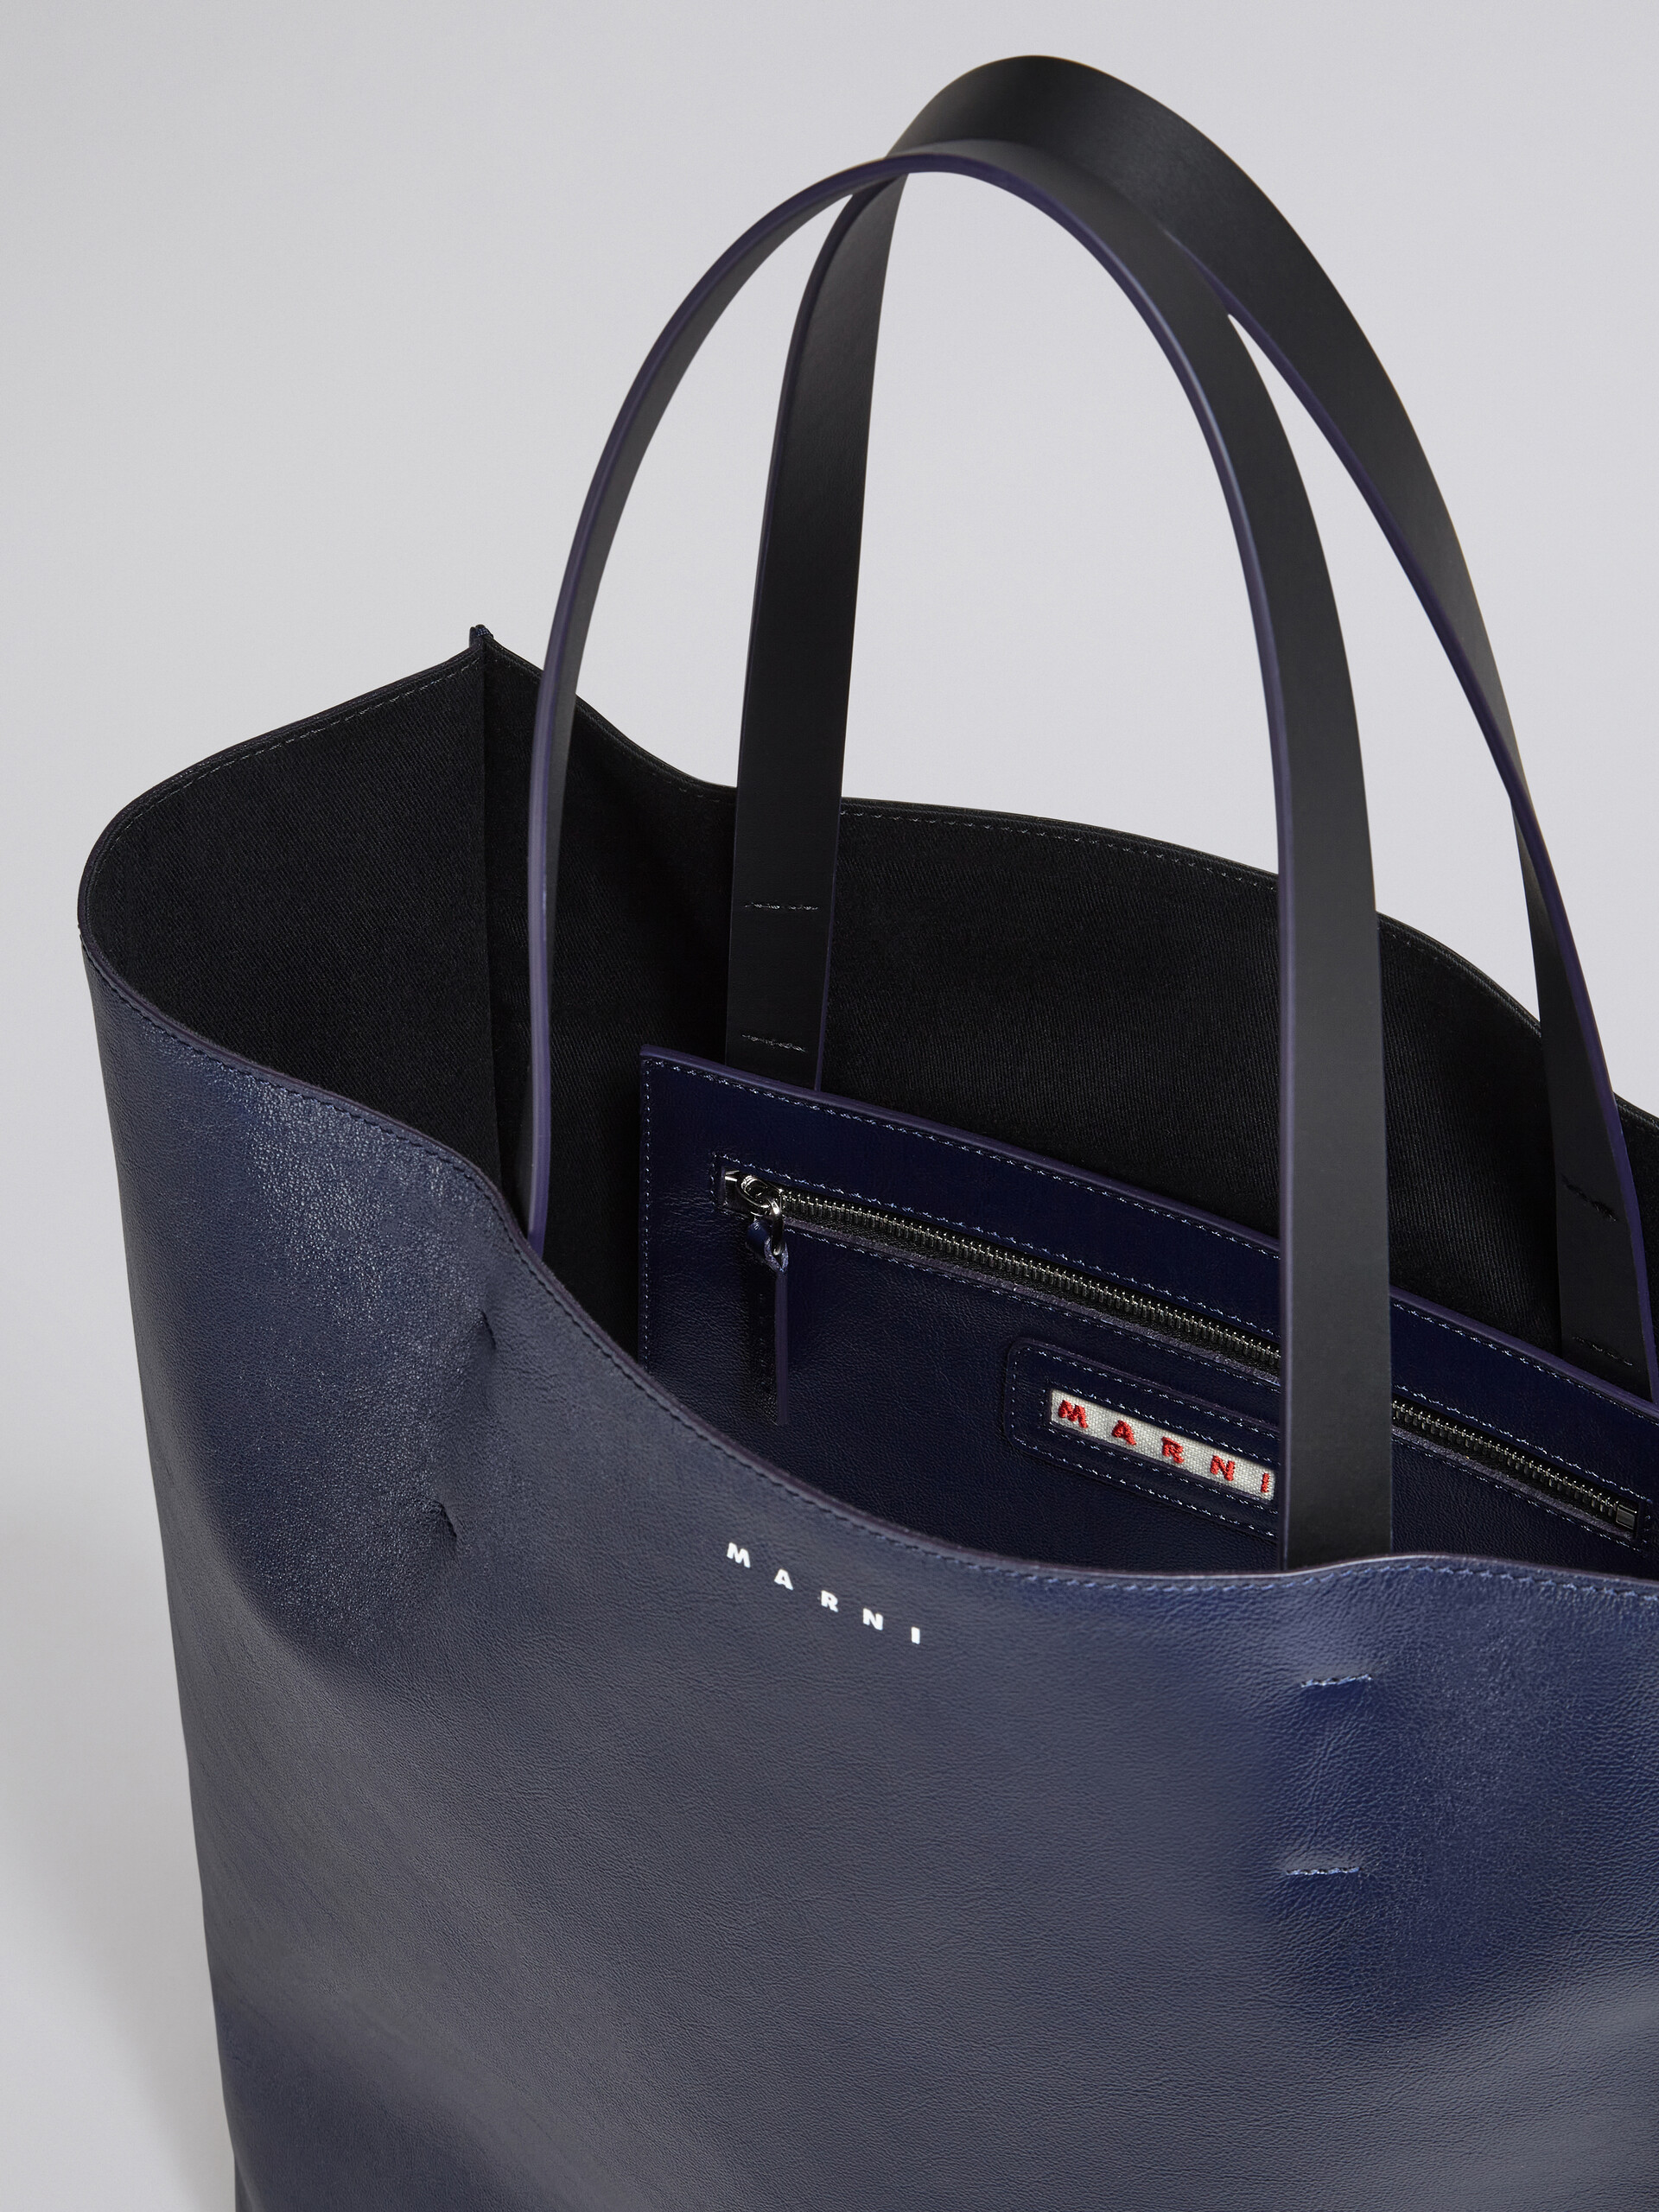 MUSEO SOFT large bag in blue and black shiny leather